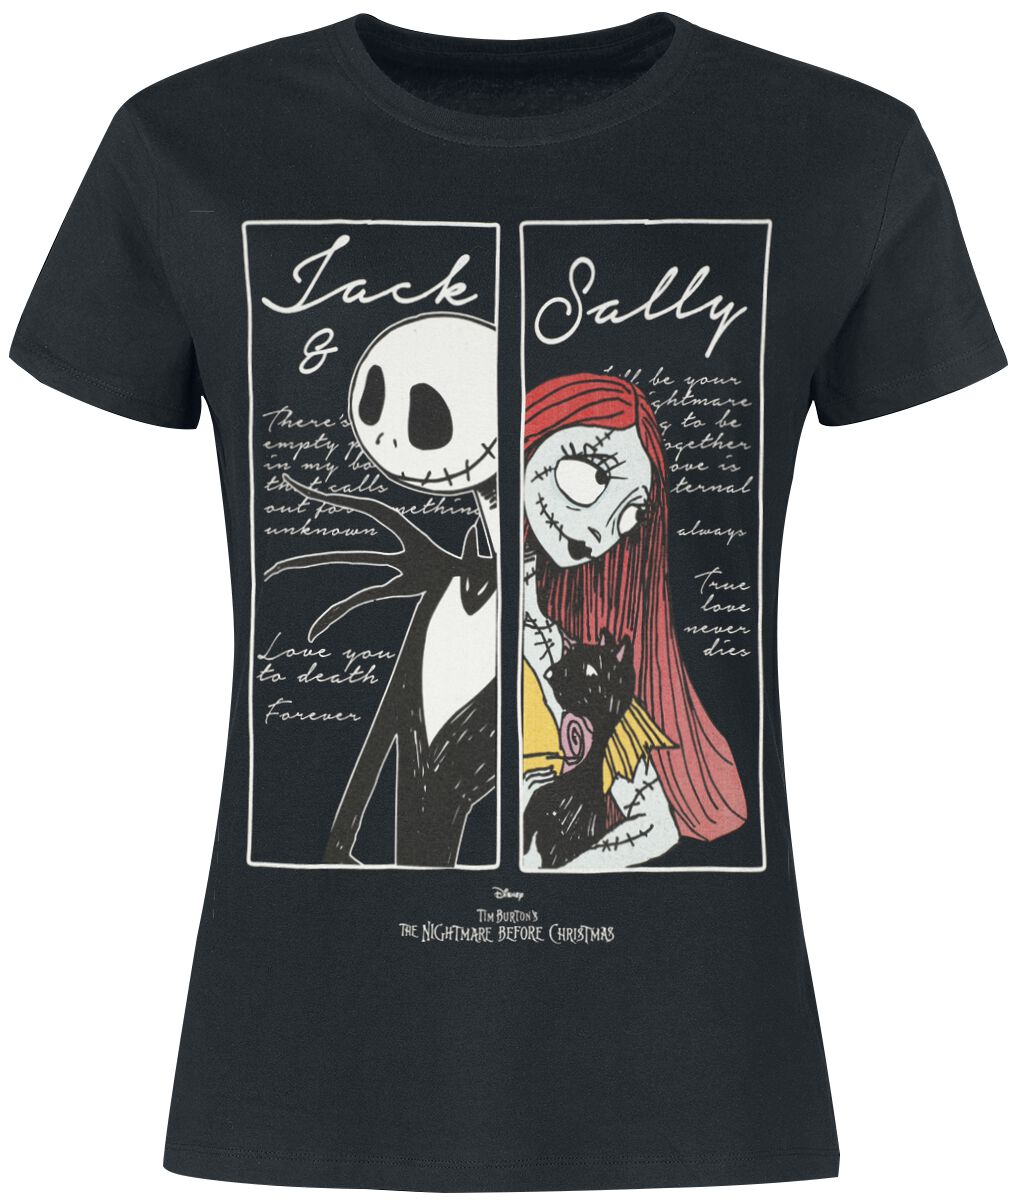 The Nightmare Before Christmas Jack & Sally T-Shirt schwarz in M